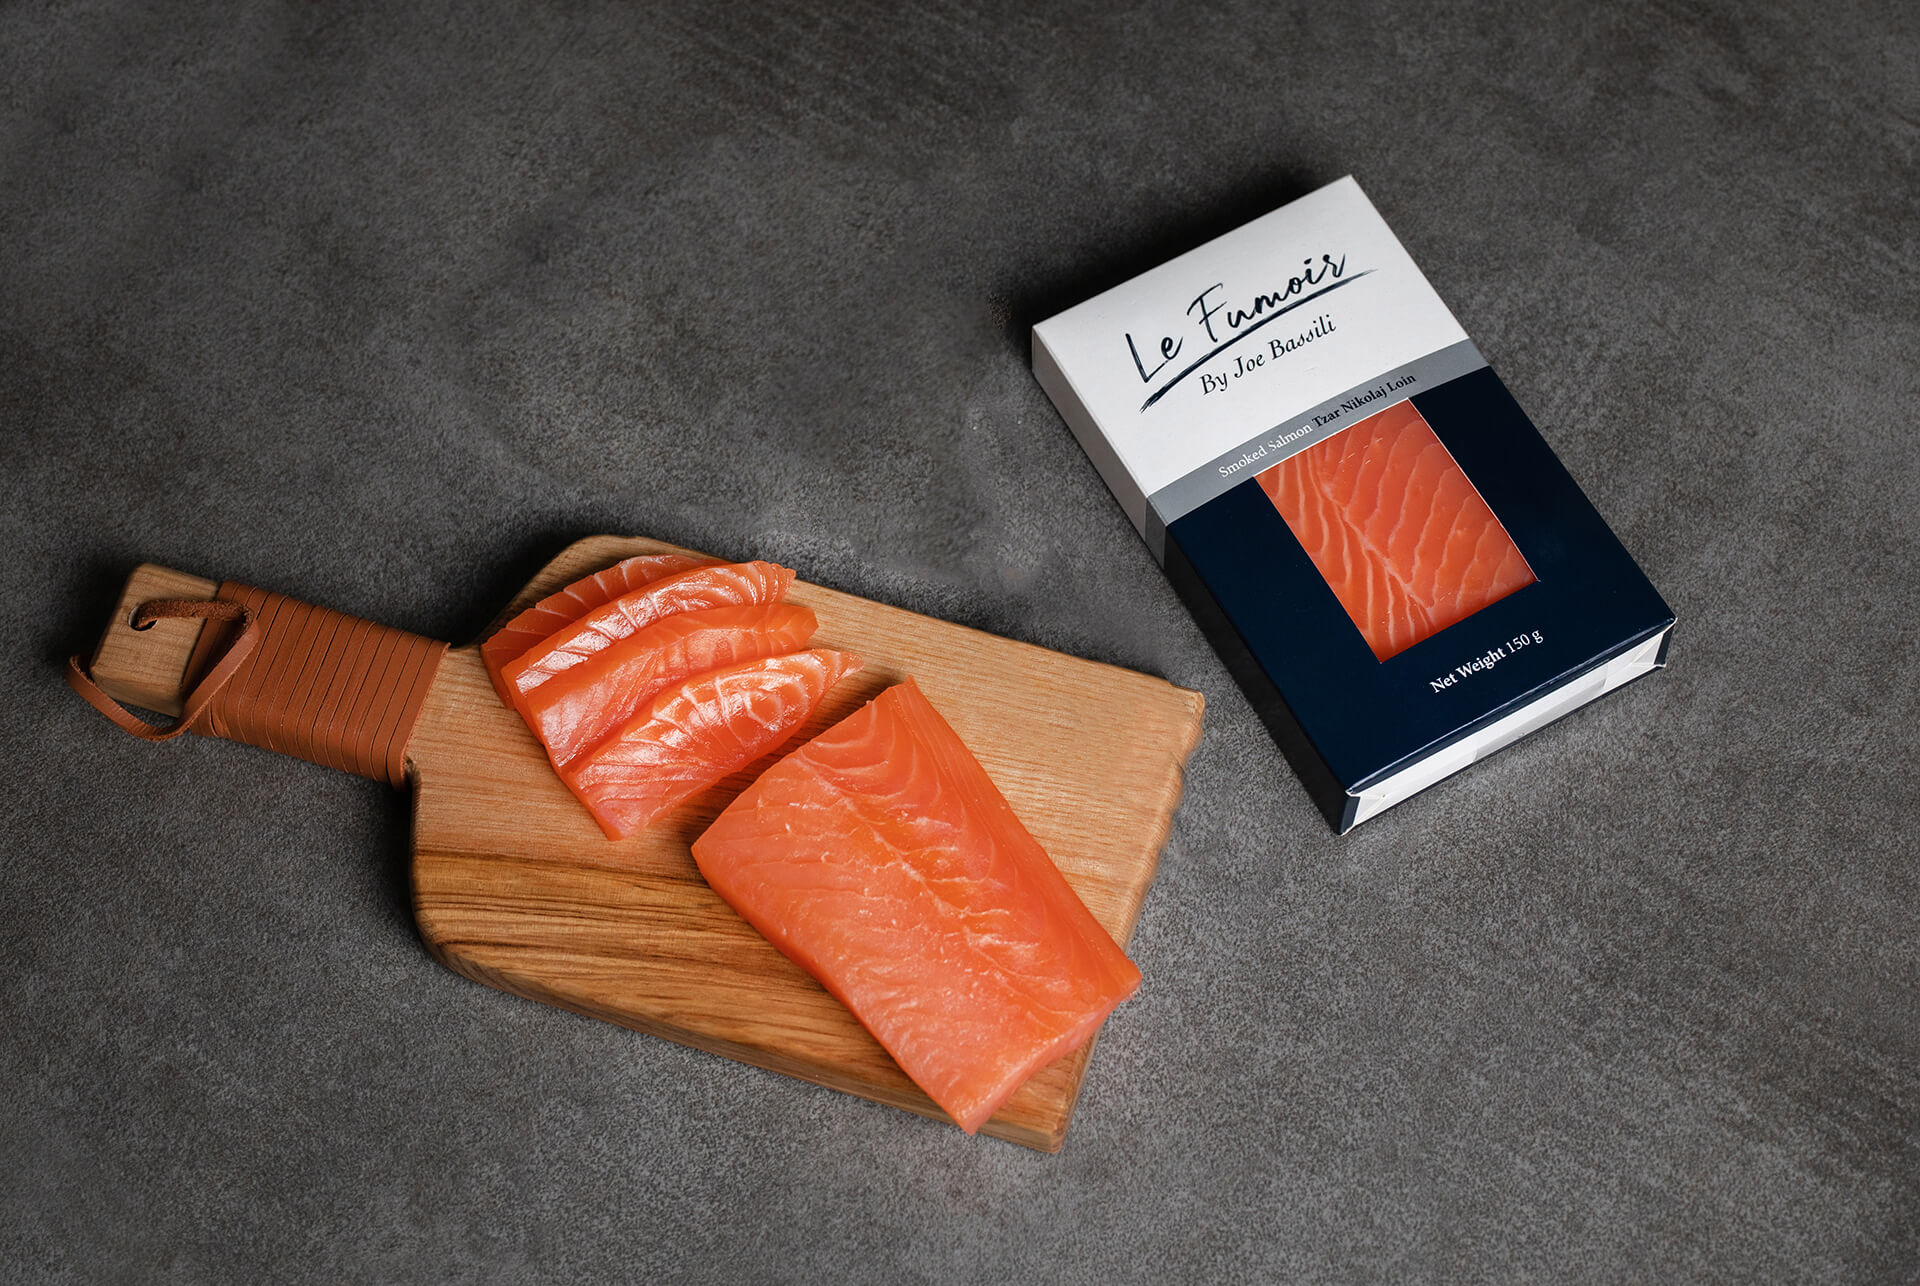 Smoked Salmon factory supplier In Dubai and UAE